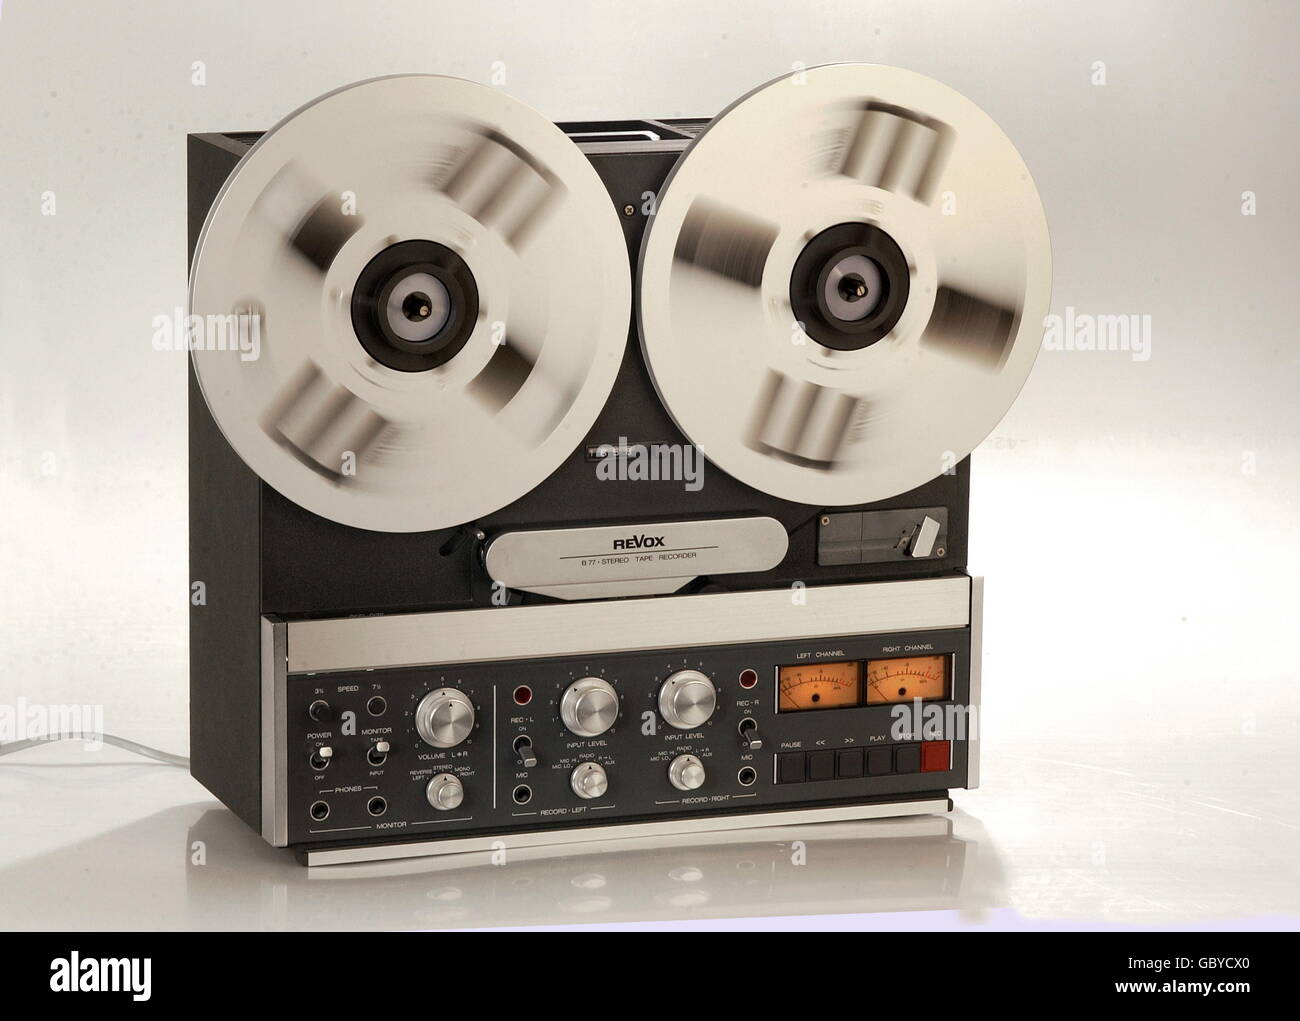 technics, tape recorders, stereo tape recording machine Revox B77, made by Studer Revox, 1978, 1970s, 70s, 20th century, historic, historical, studio shot, motion blur, rotating tape reel, rejection instruments, display, weight: circa 17kg, audio tape, Additional-Rights-Clearences-Not Available Stock Photo